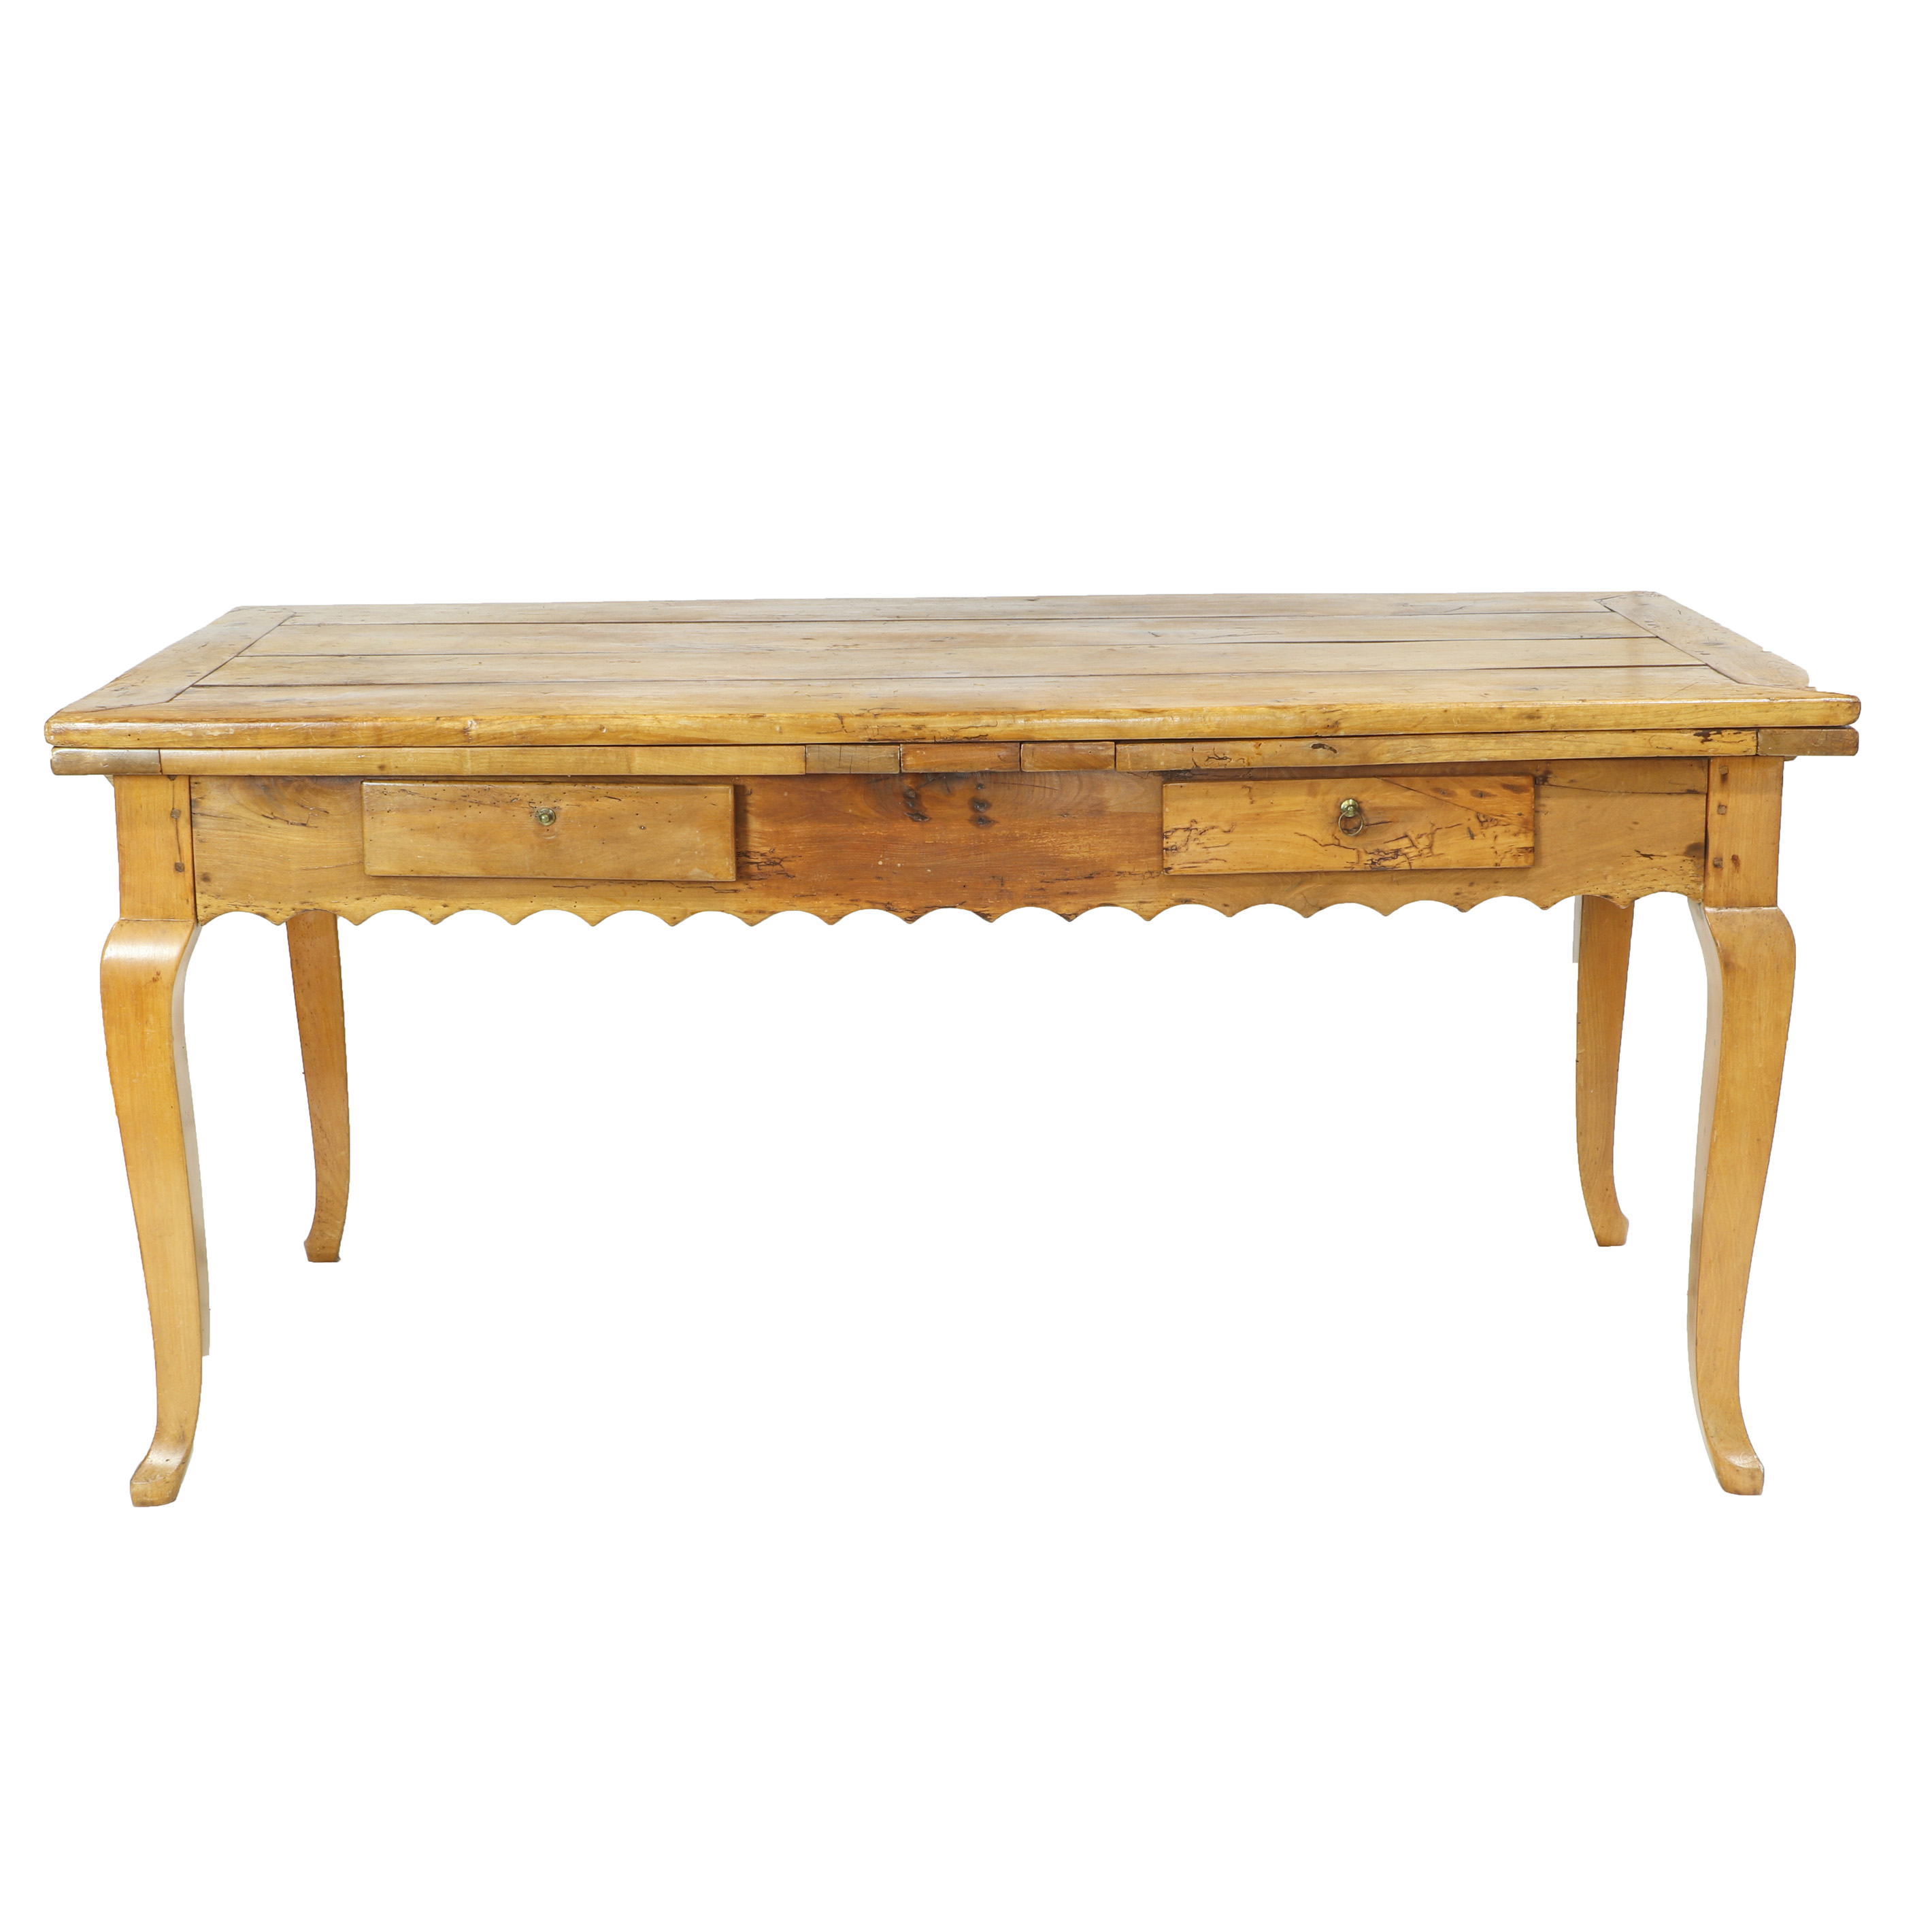 A FRENCH PROVINCIAL FRUITWOOD HARVEST 3a3d73